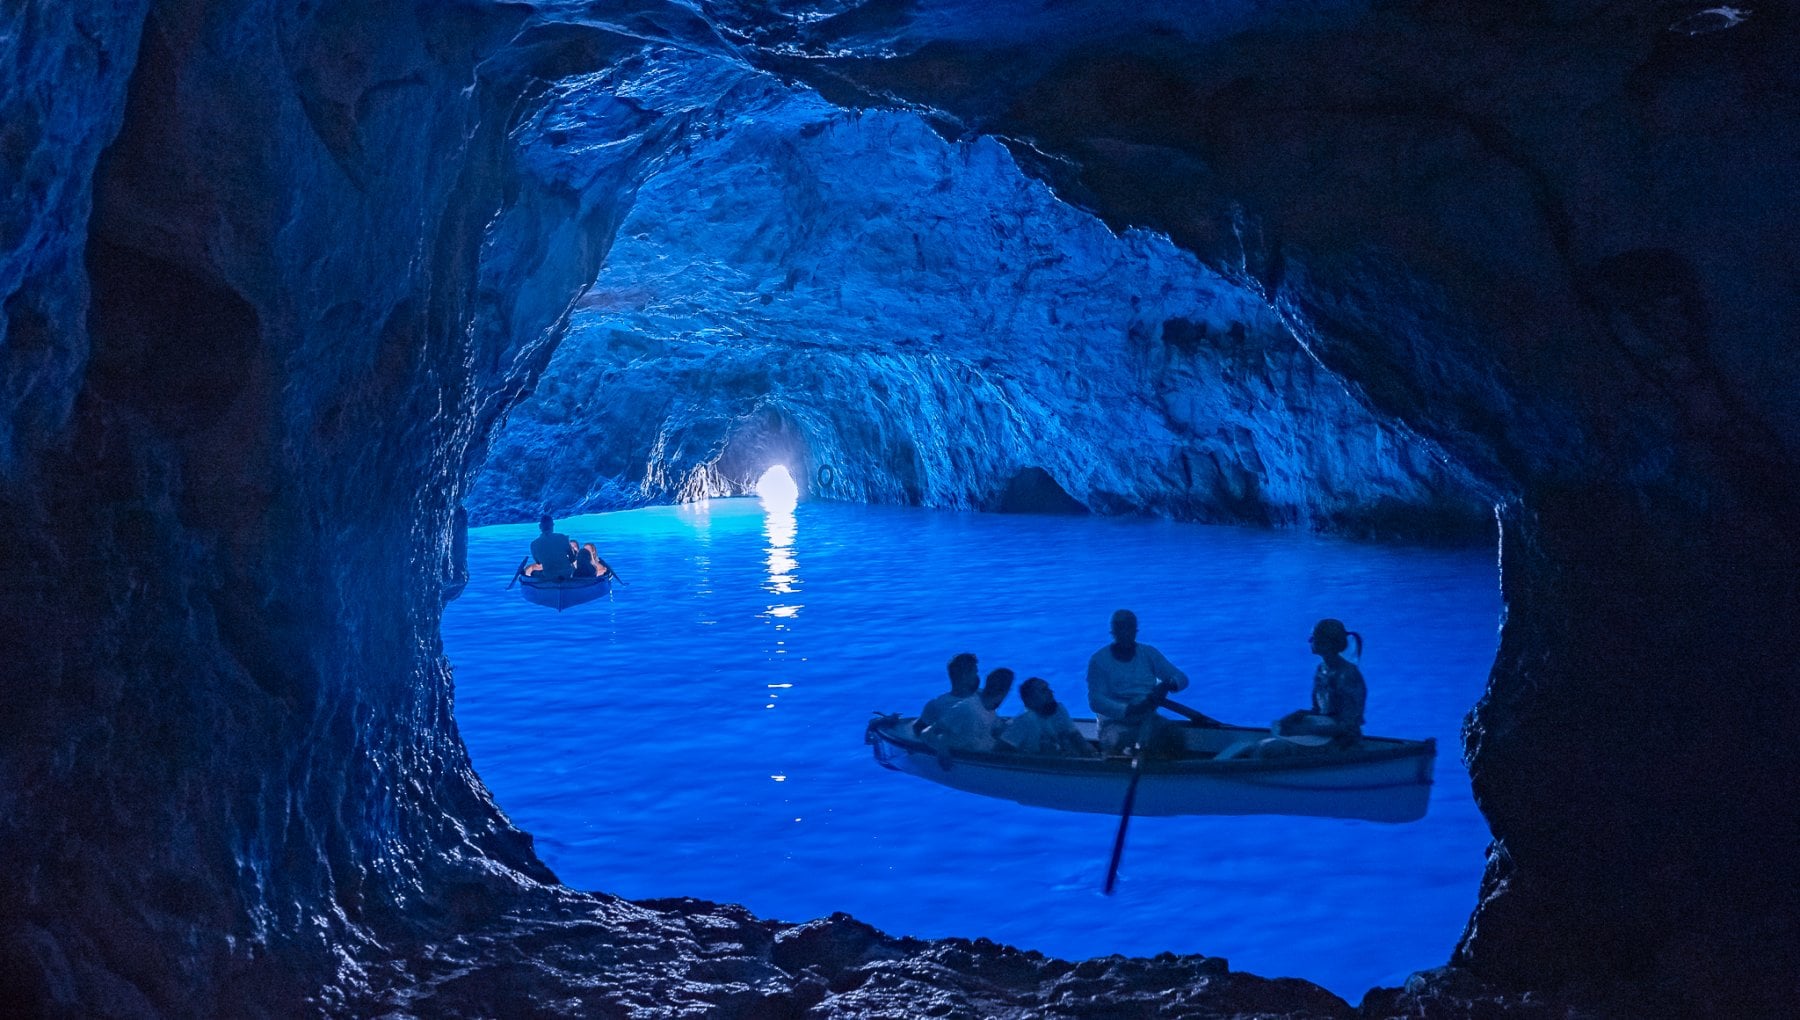 Capri Island and Blue Grotto Shared Tour from Sorrento